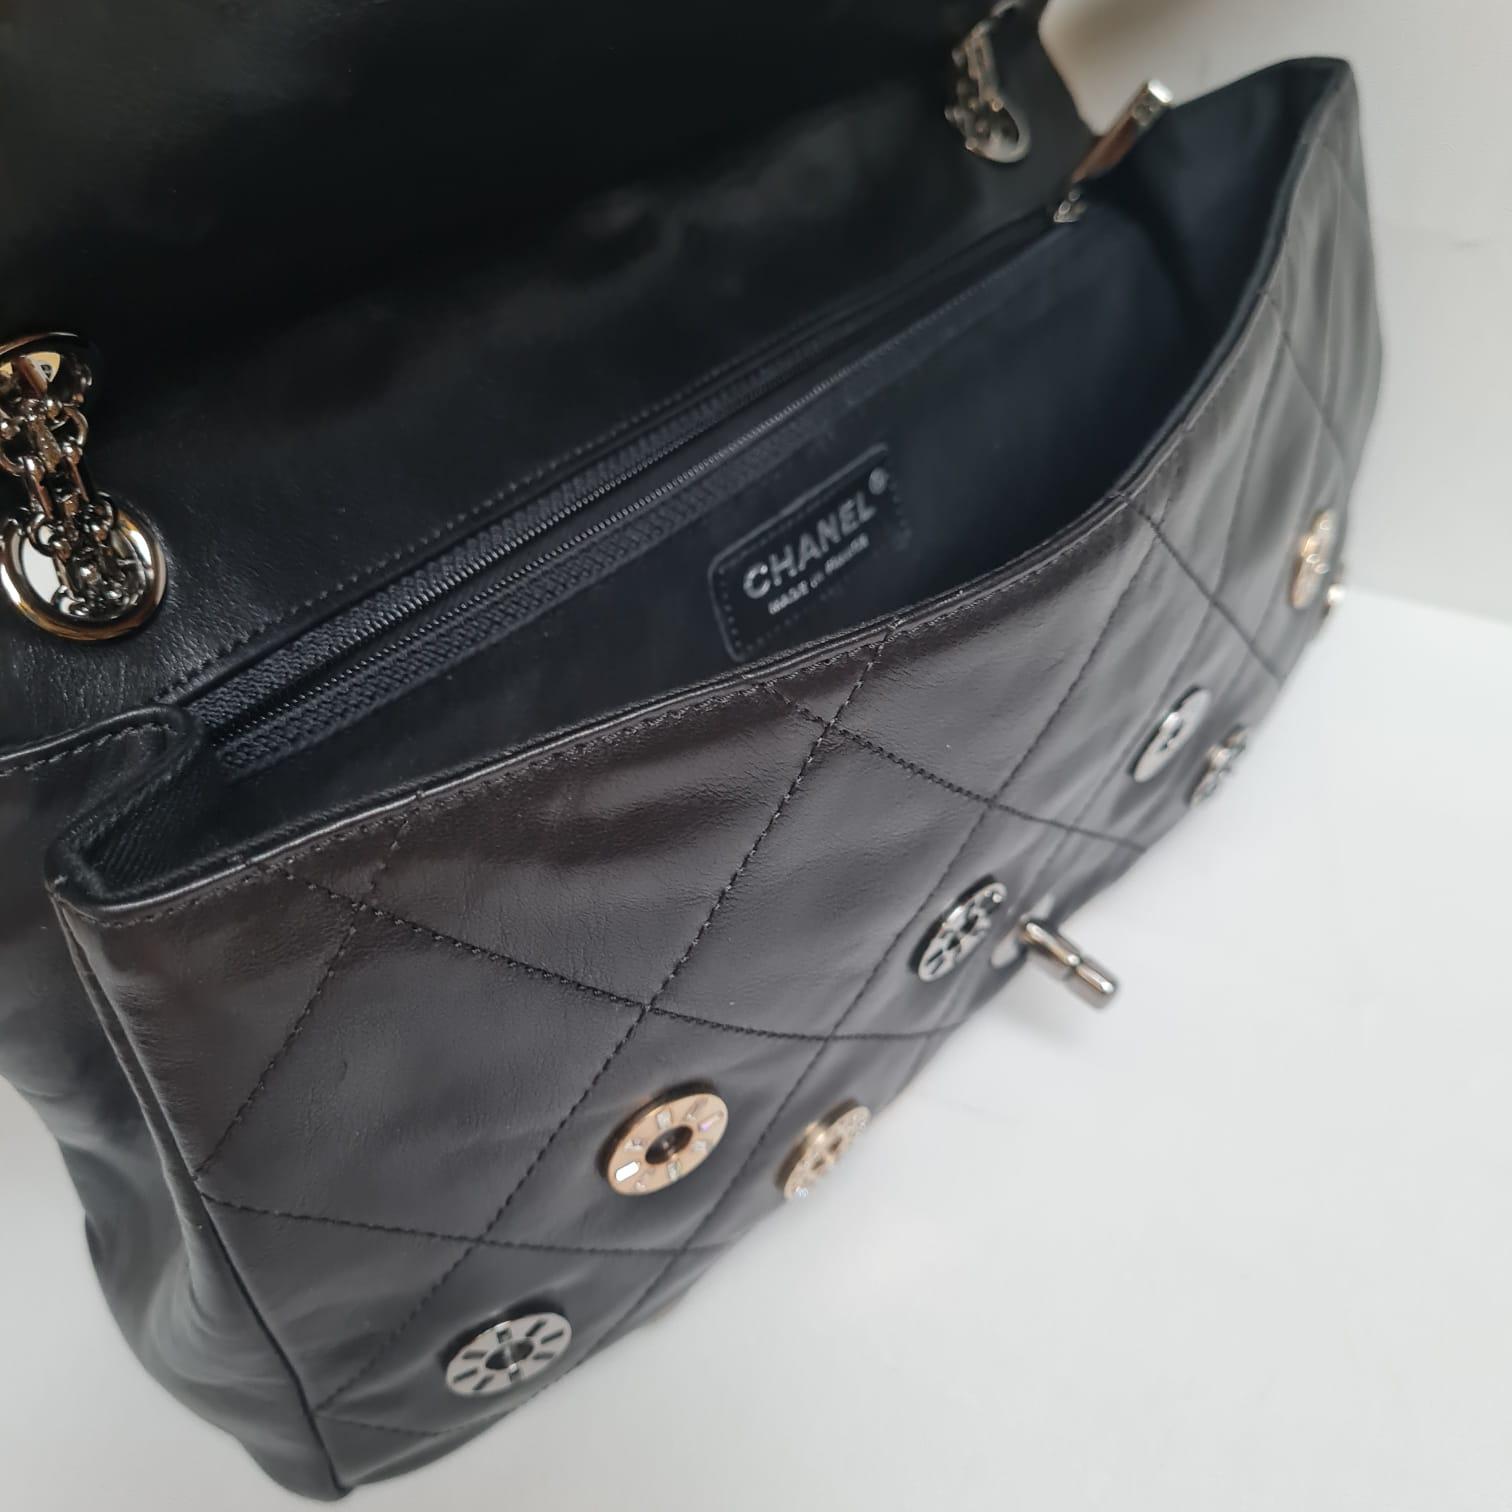 A rare coin embellishment jumbo flap bag. Black supple leather with beautiful embellishments. Minor wear on the corners. Series #11. Comes with its card and dust bag. 